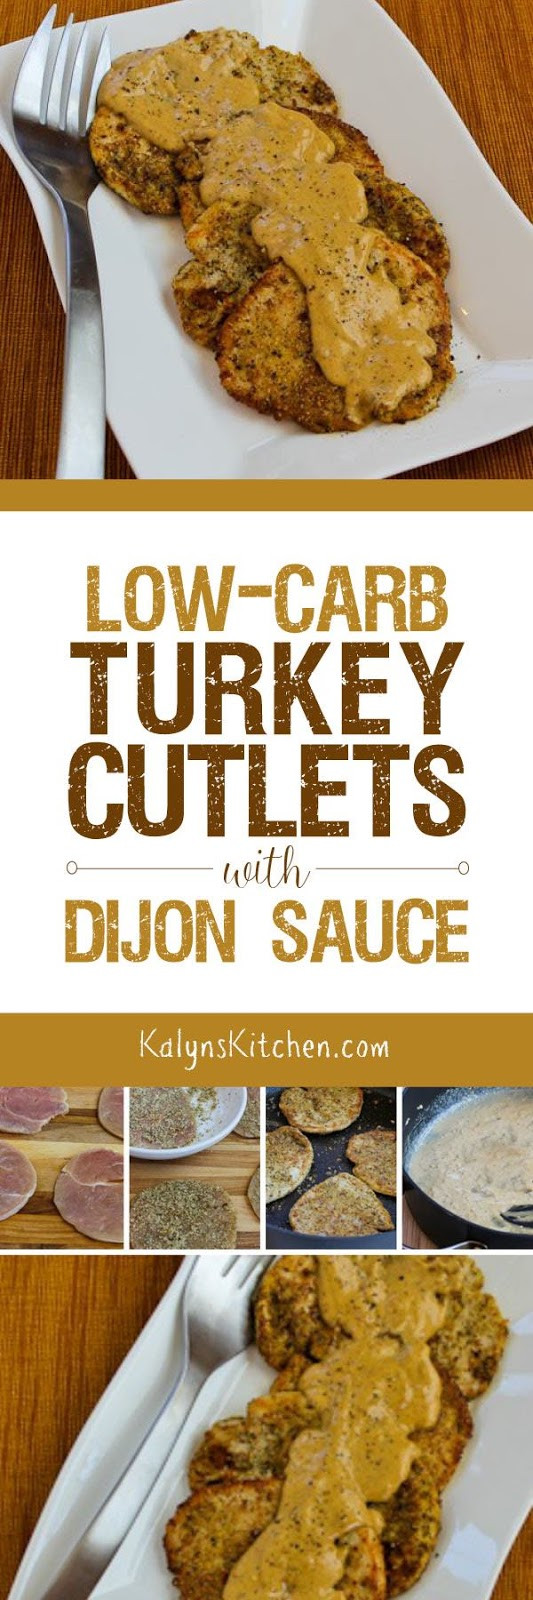 Low Carb Thanksgiving Recipes
 Low Carb Turkey Cutlets with Dijon Sauce Kalyn s Kitchen